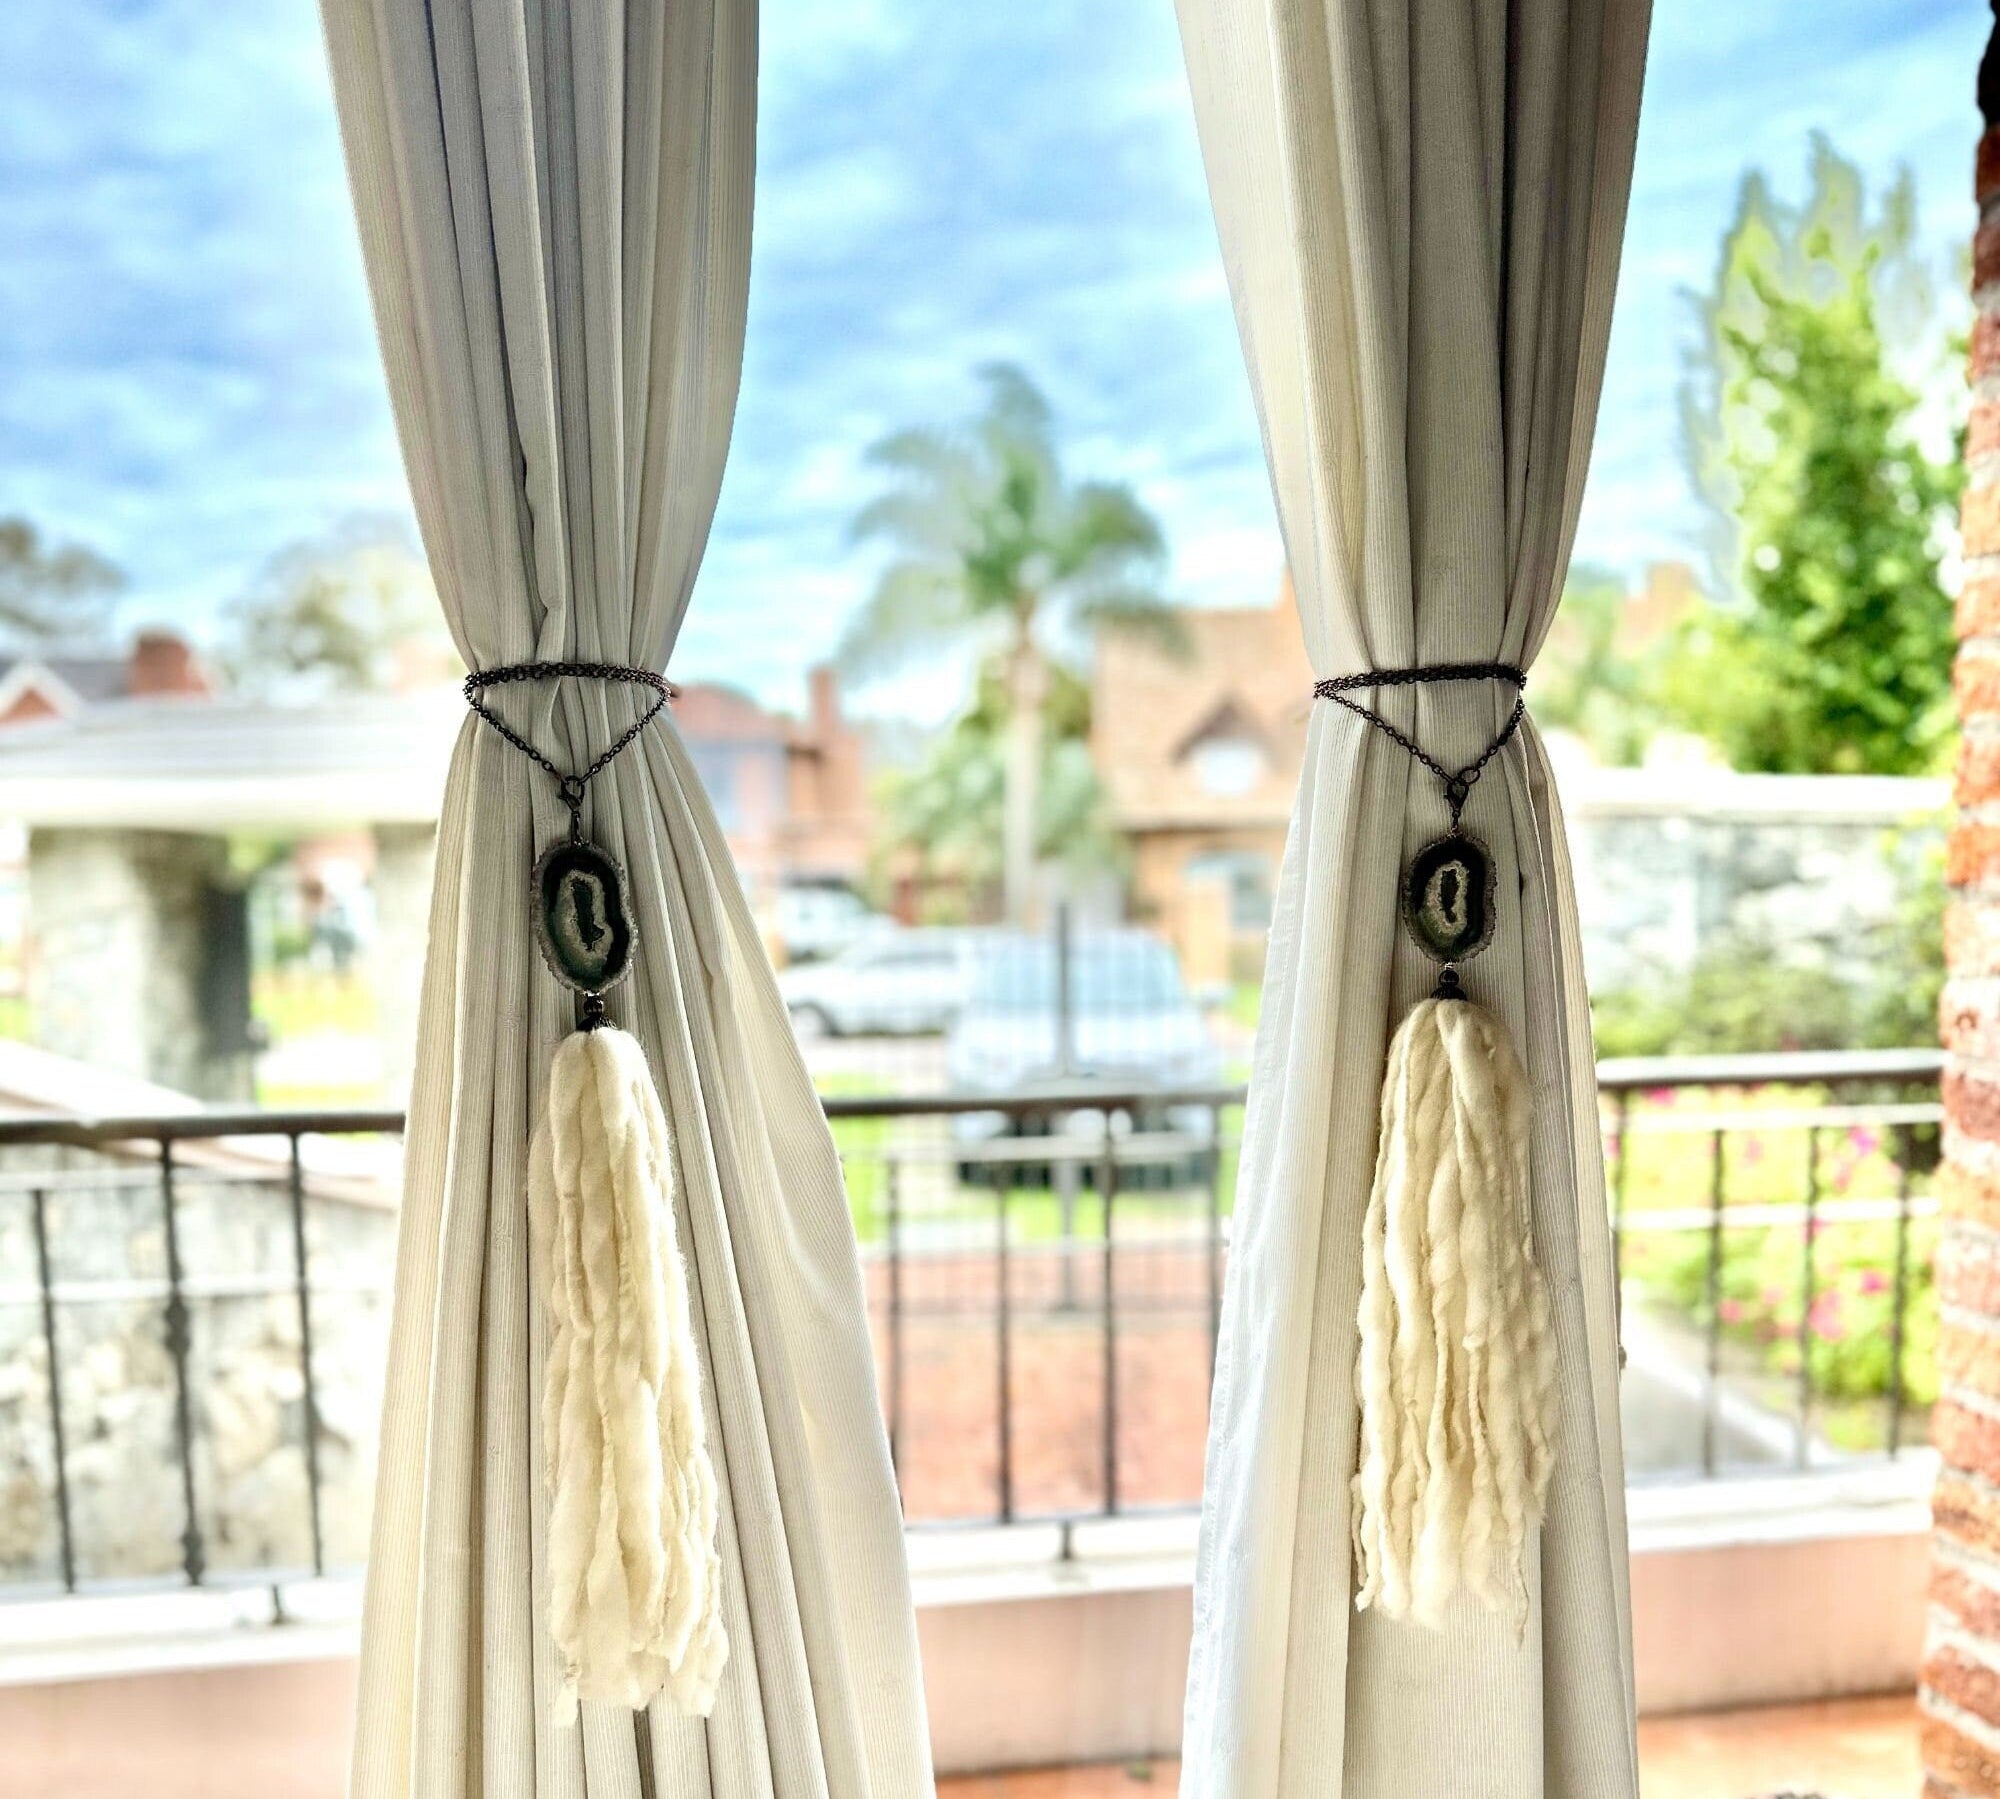 Curtains Tie Back with Amethyst Crystal and Merino Wool Tassels, Stalactite Stone Home Decor, window curtains holder with metal chains